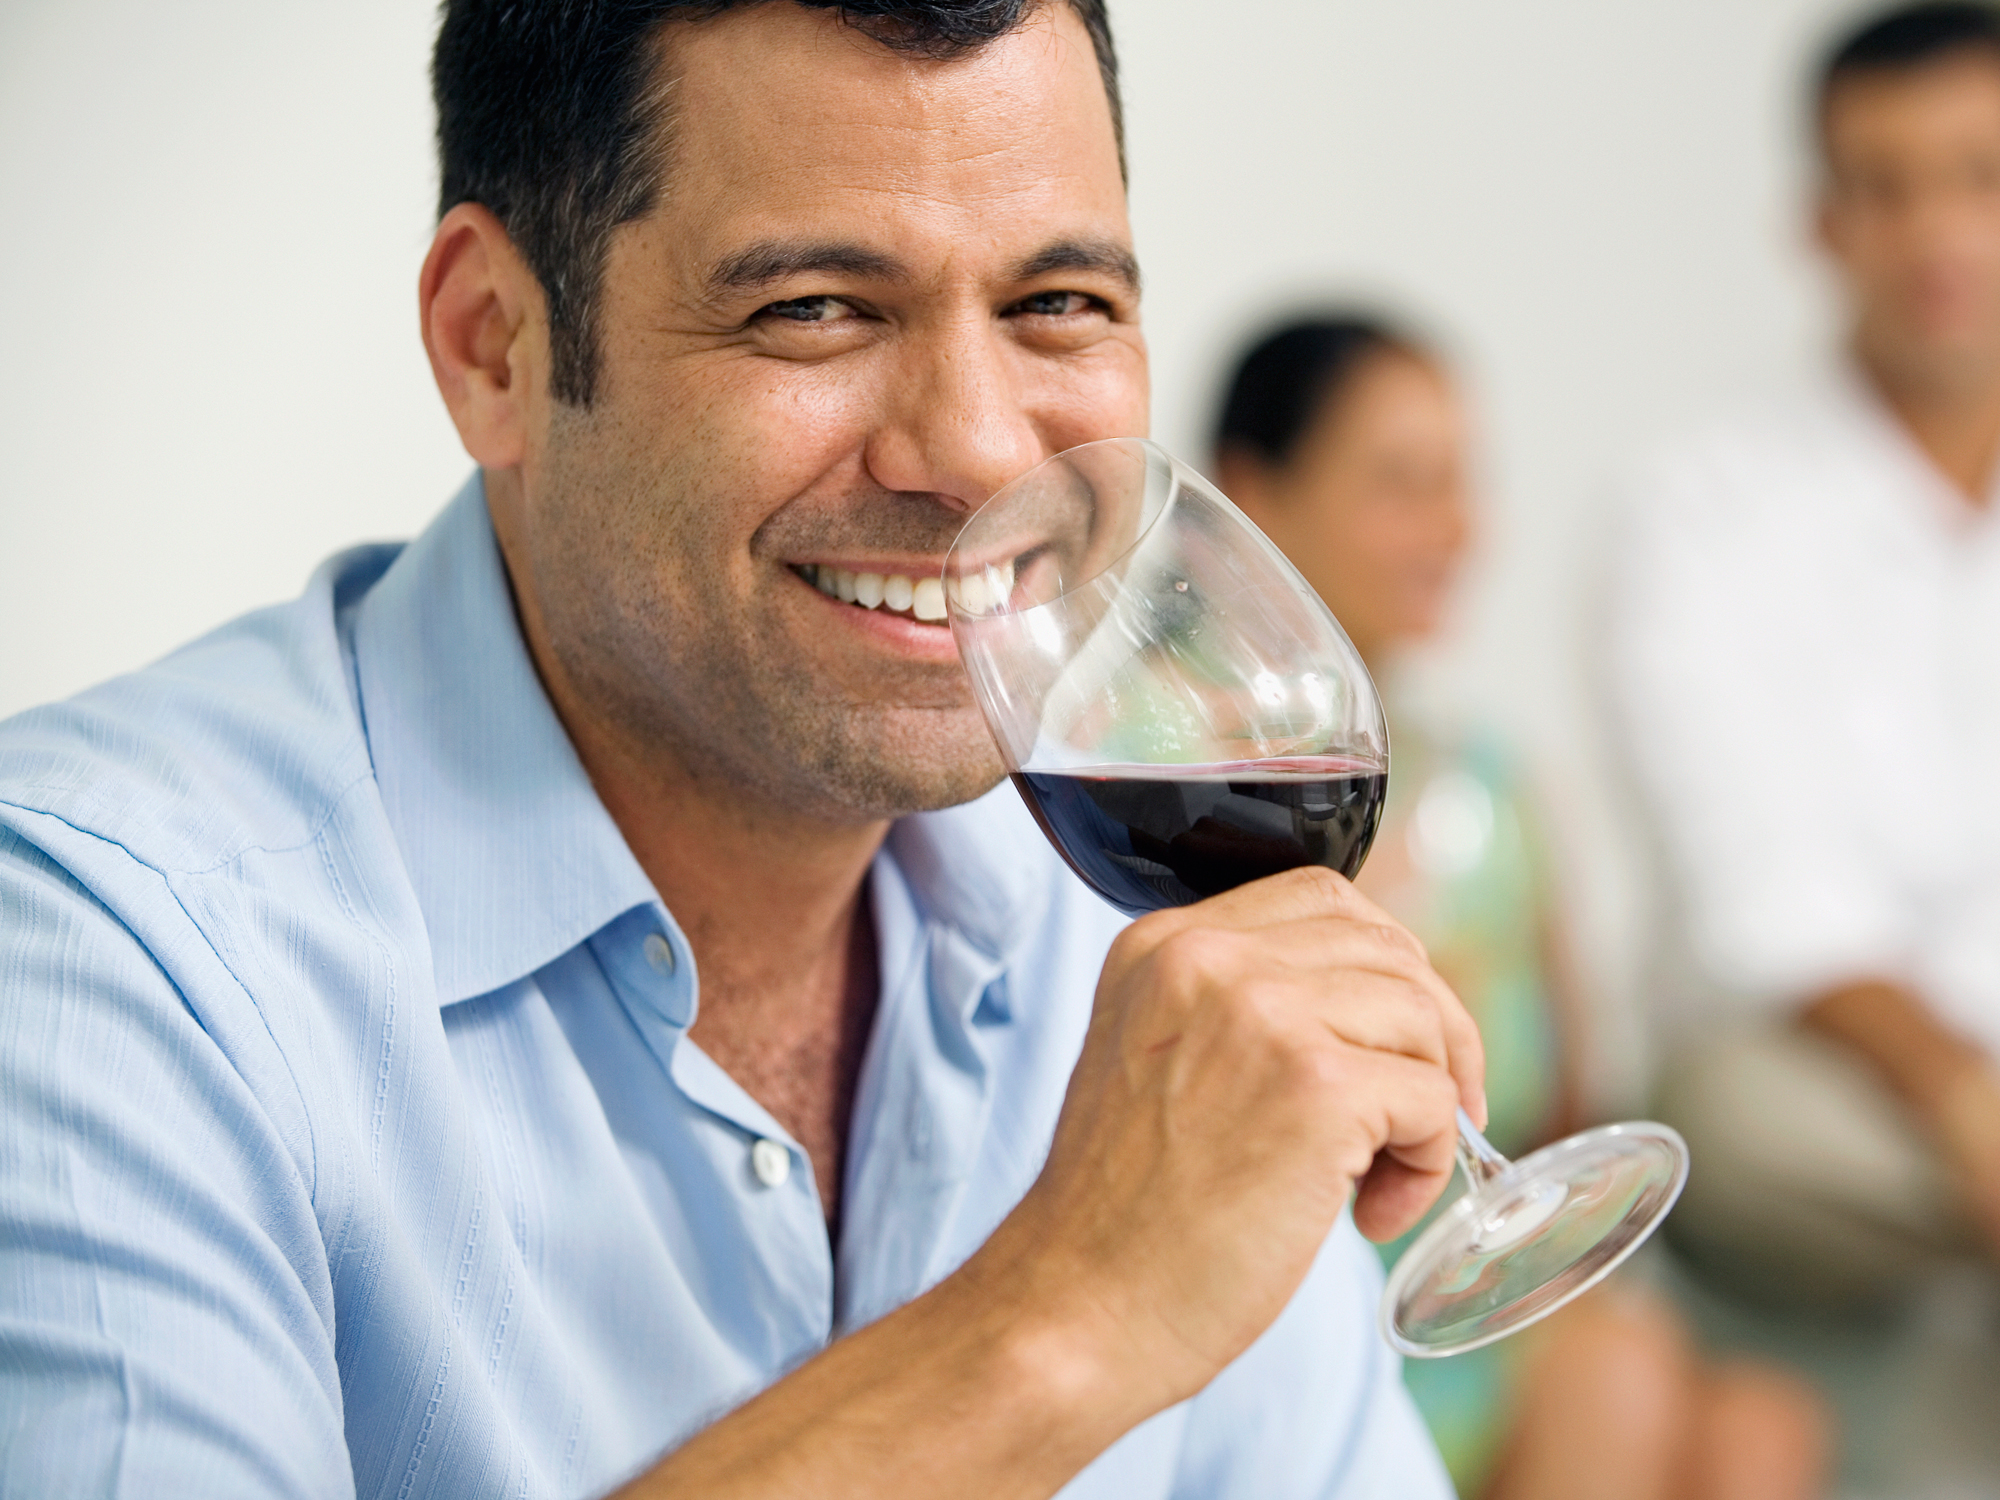 A toast to red wine’s protective prostate benefits